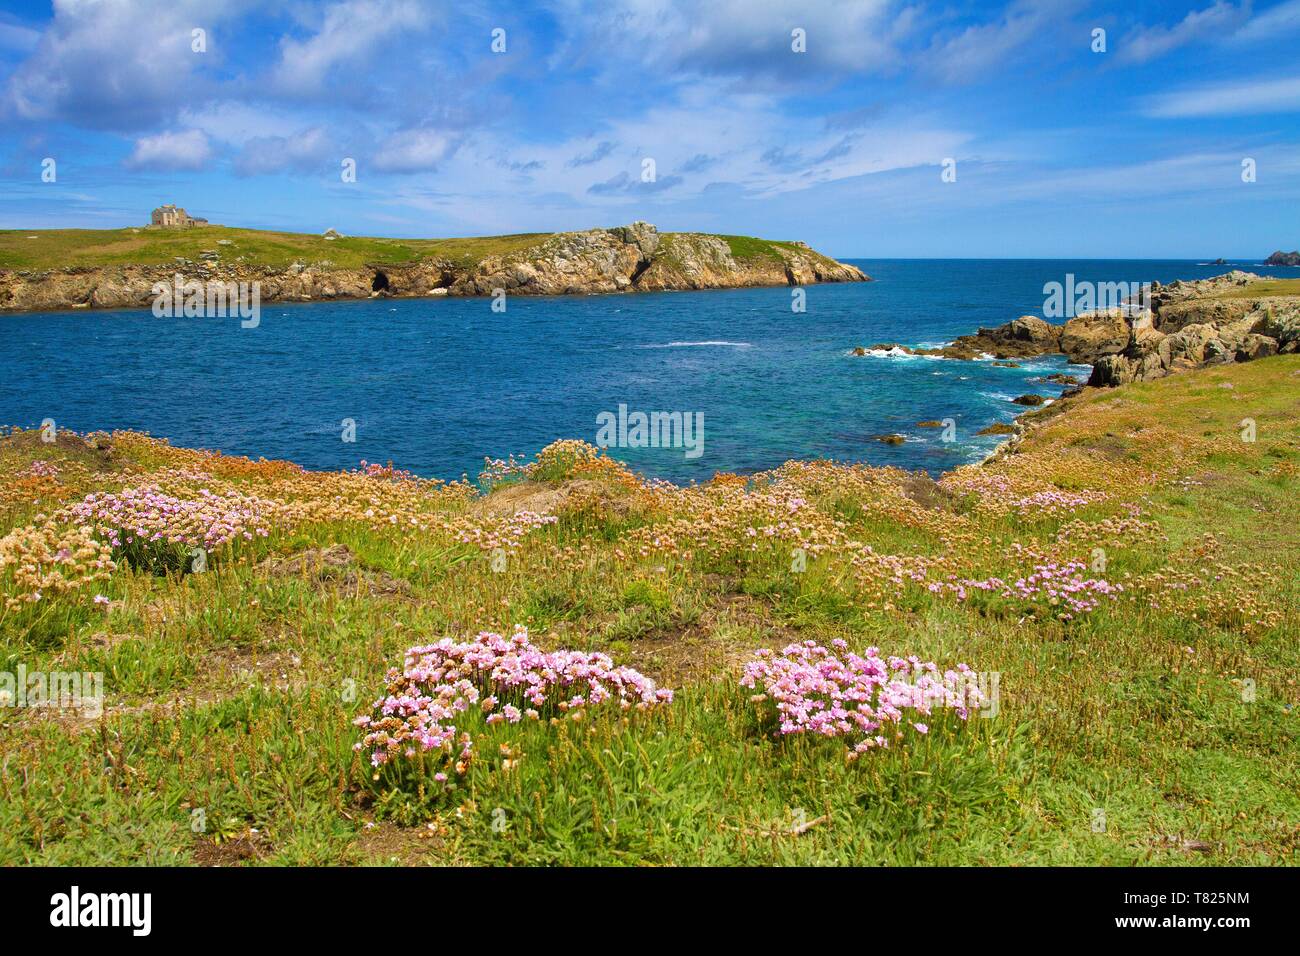 France, Finistere, Ponant islands, The Regional Natural Park of Armorica, Iroise Sea, Ouessant Island, Biosphere Reserve (UNESCO), Armeria maritima Flowers and Keller Island Stock Photo